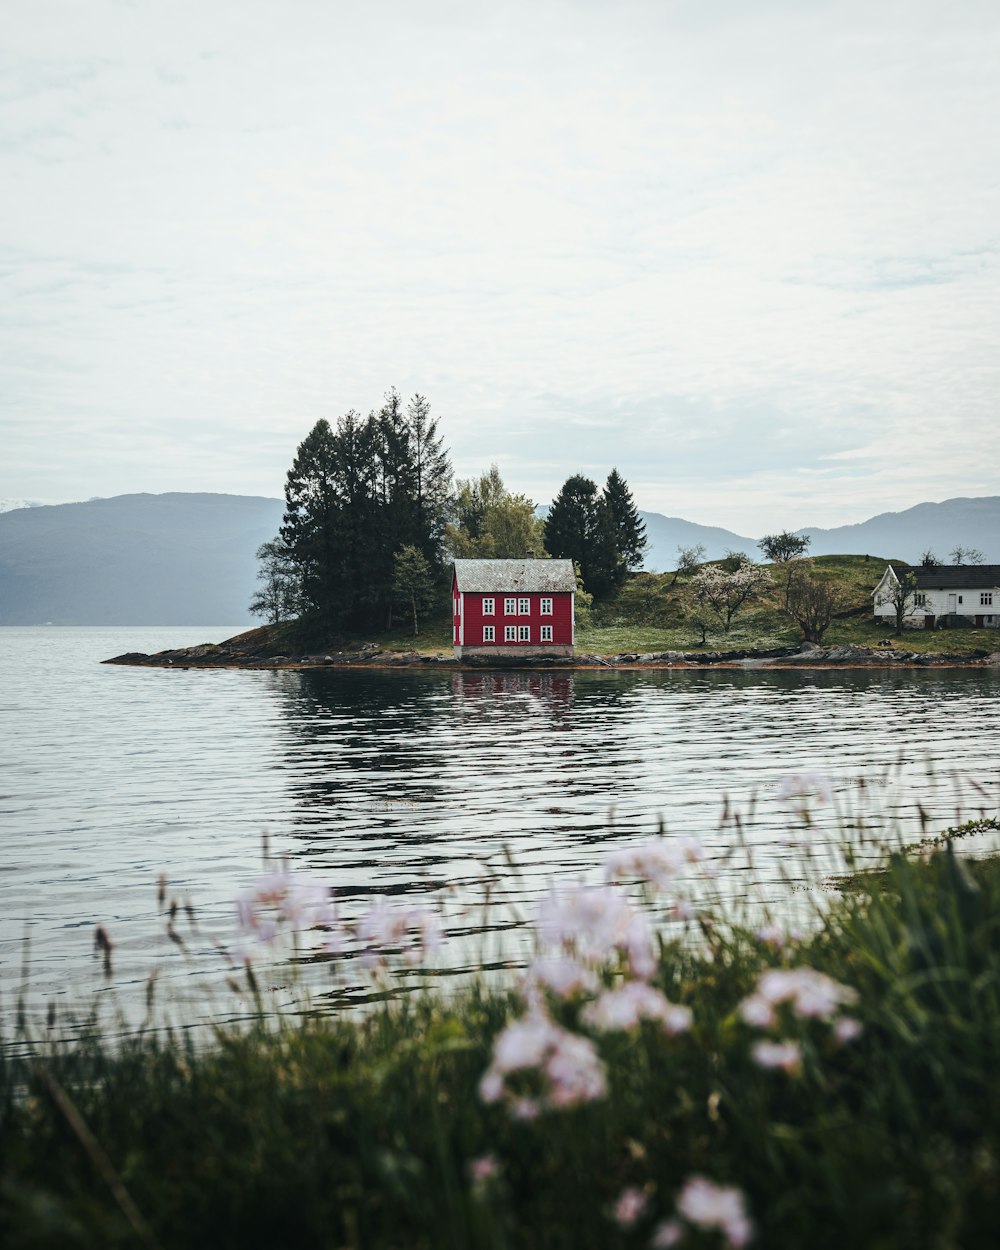 red and white wooden signage near body of water during daytime